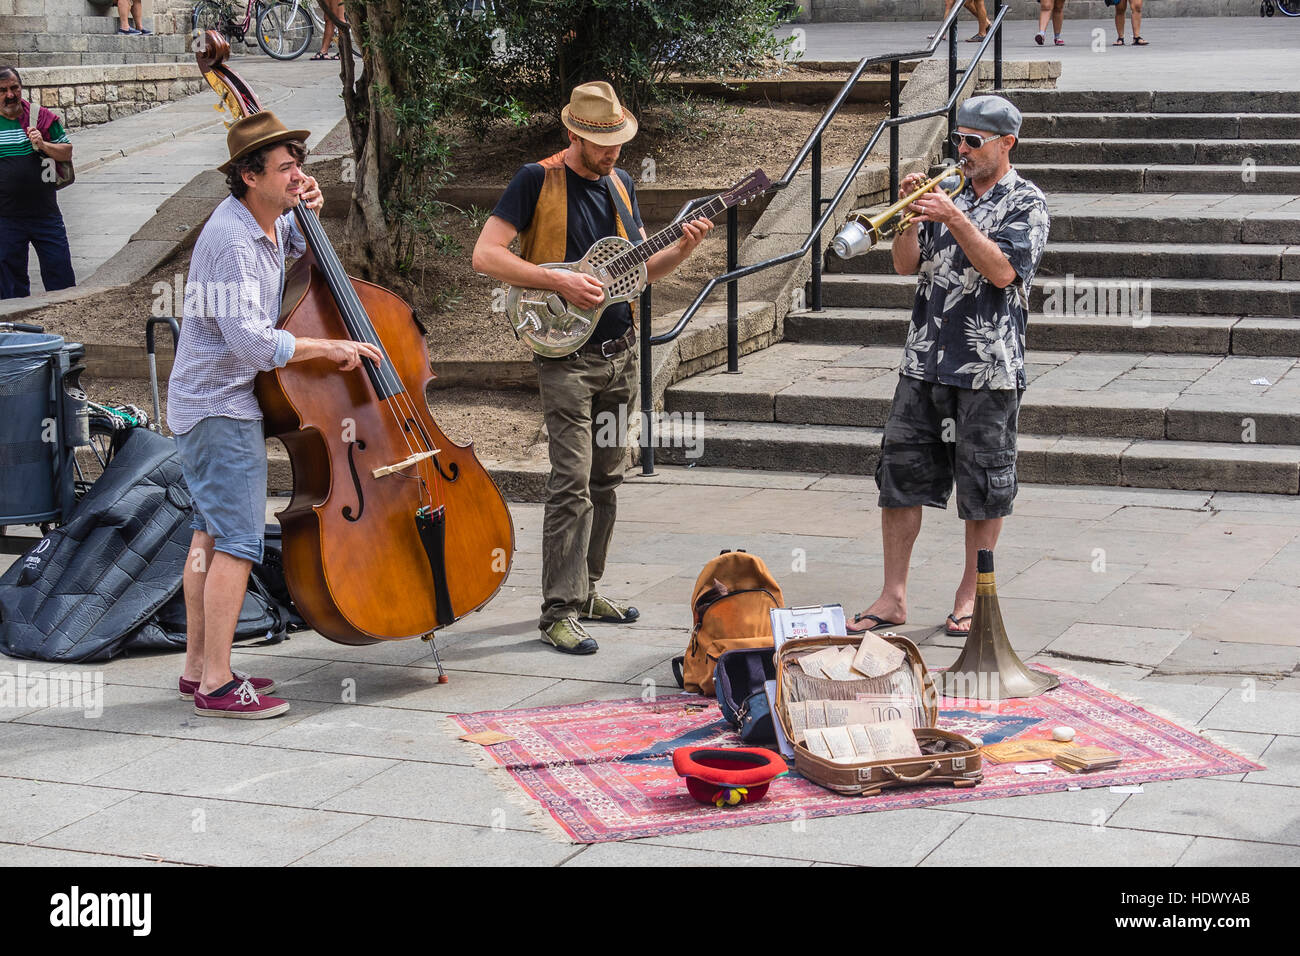 A trio of street musicians perform for the public in a plaza in Barcelona, Spain. They include a bass player, a guitarist and a trumpeter. Stock Photo